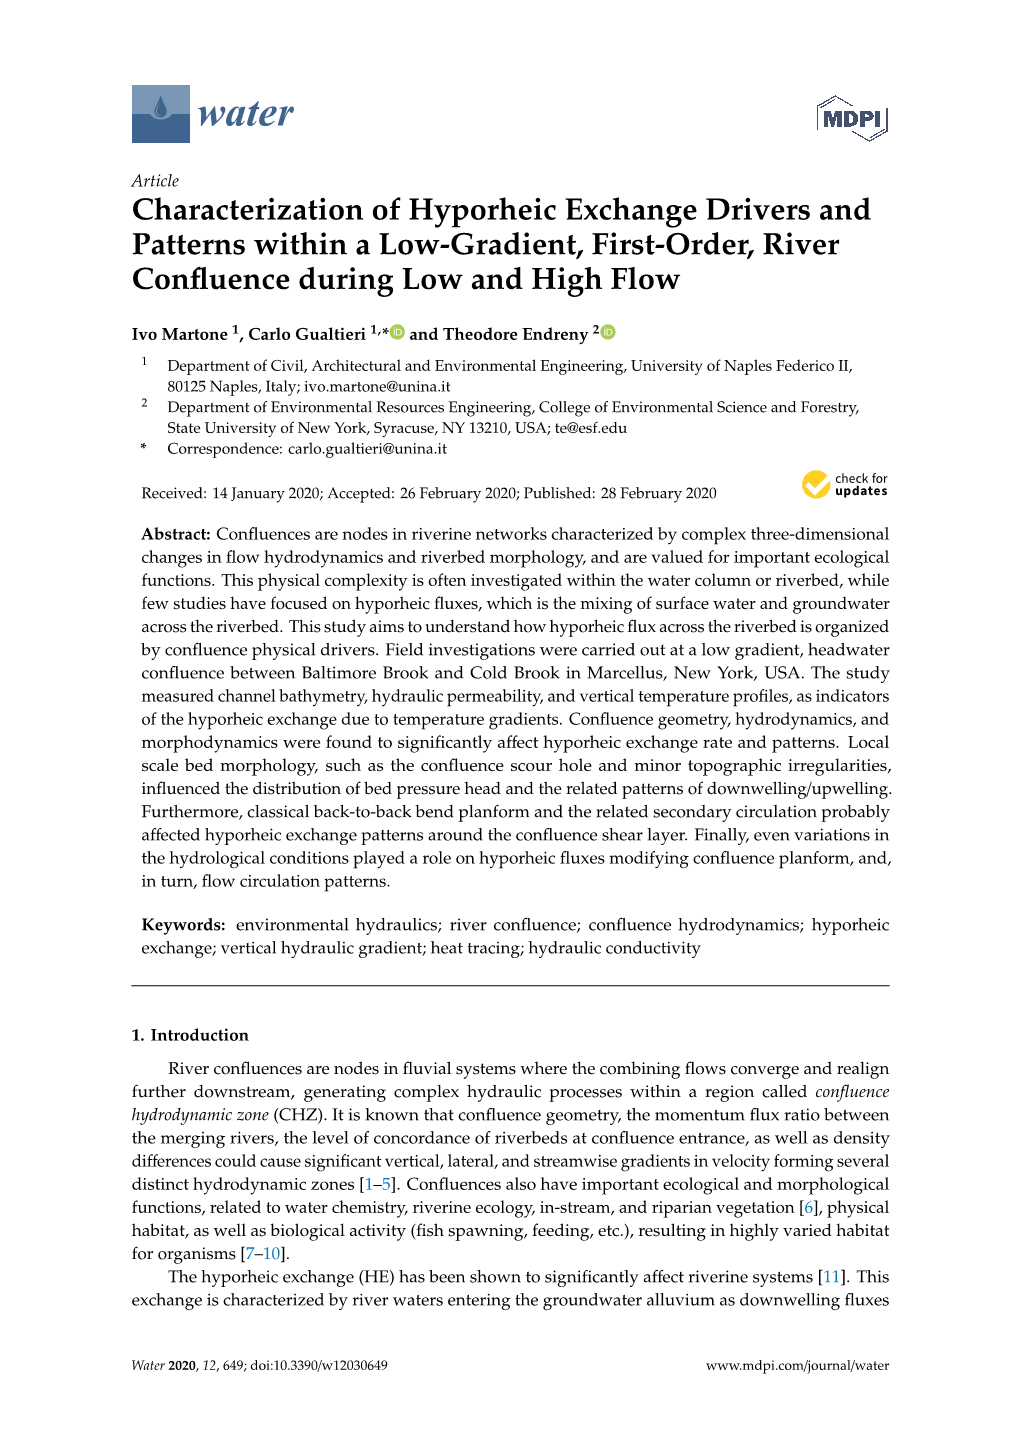 Characterization of Hyporheic Exchange Drivers and Patterns Within a Low-Gradient, First-Order, River Conﬂuence During Low and High Flow